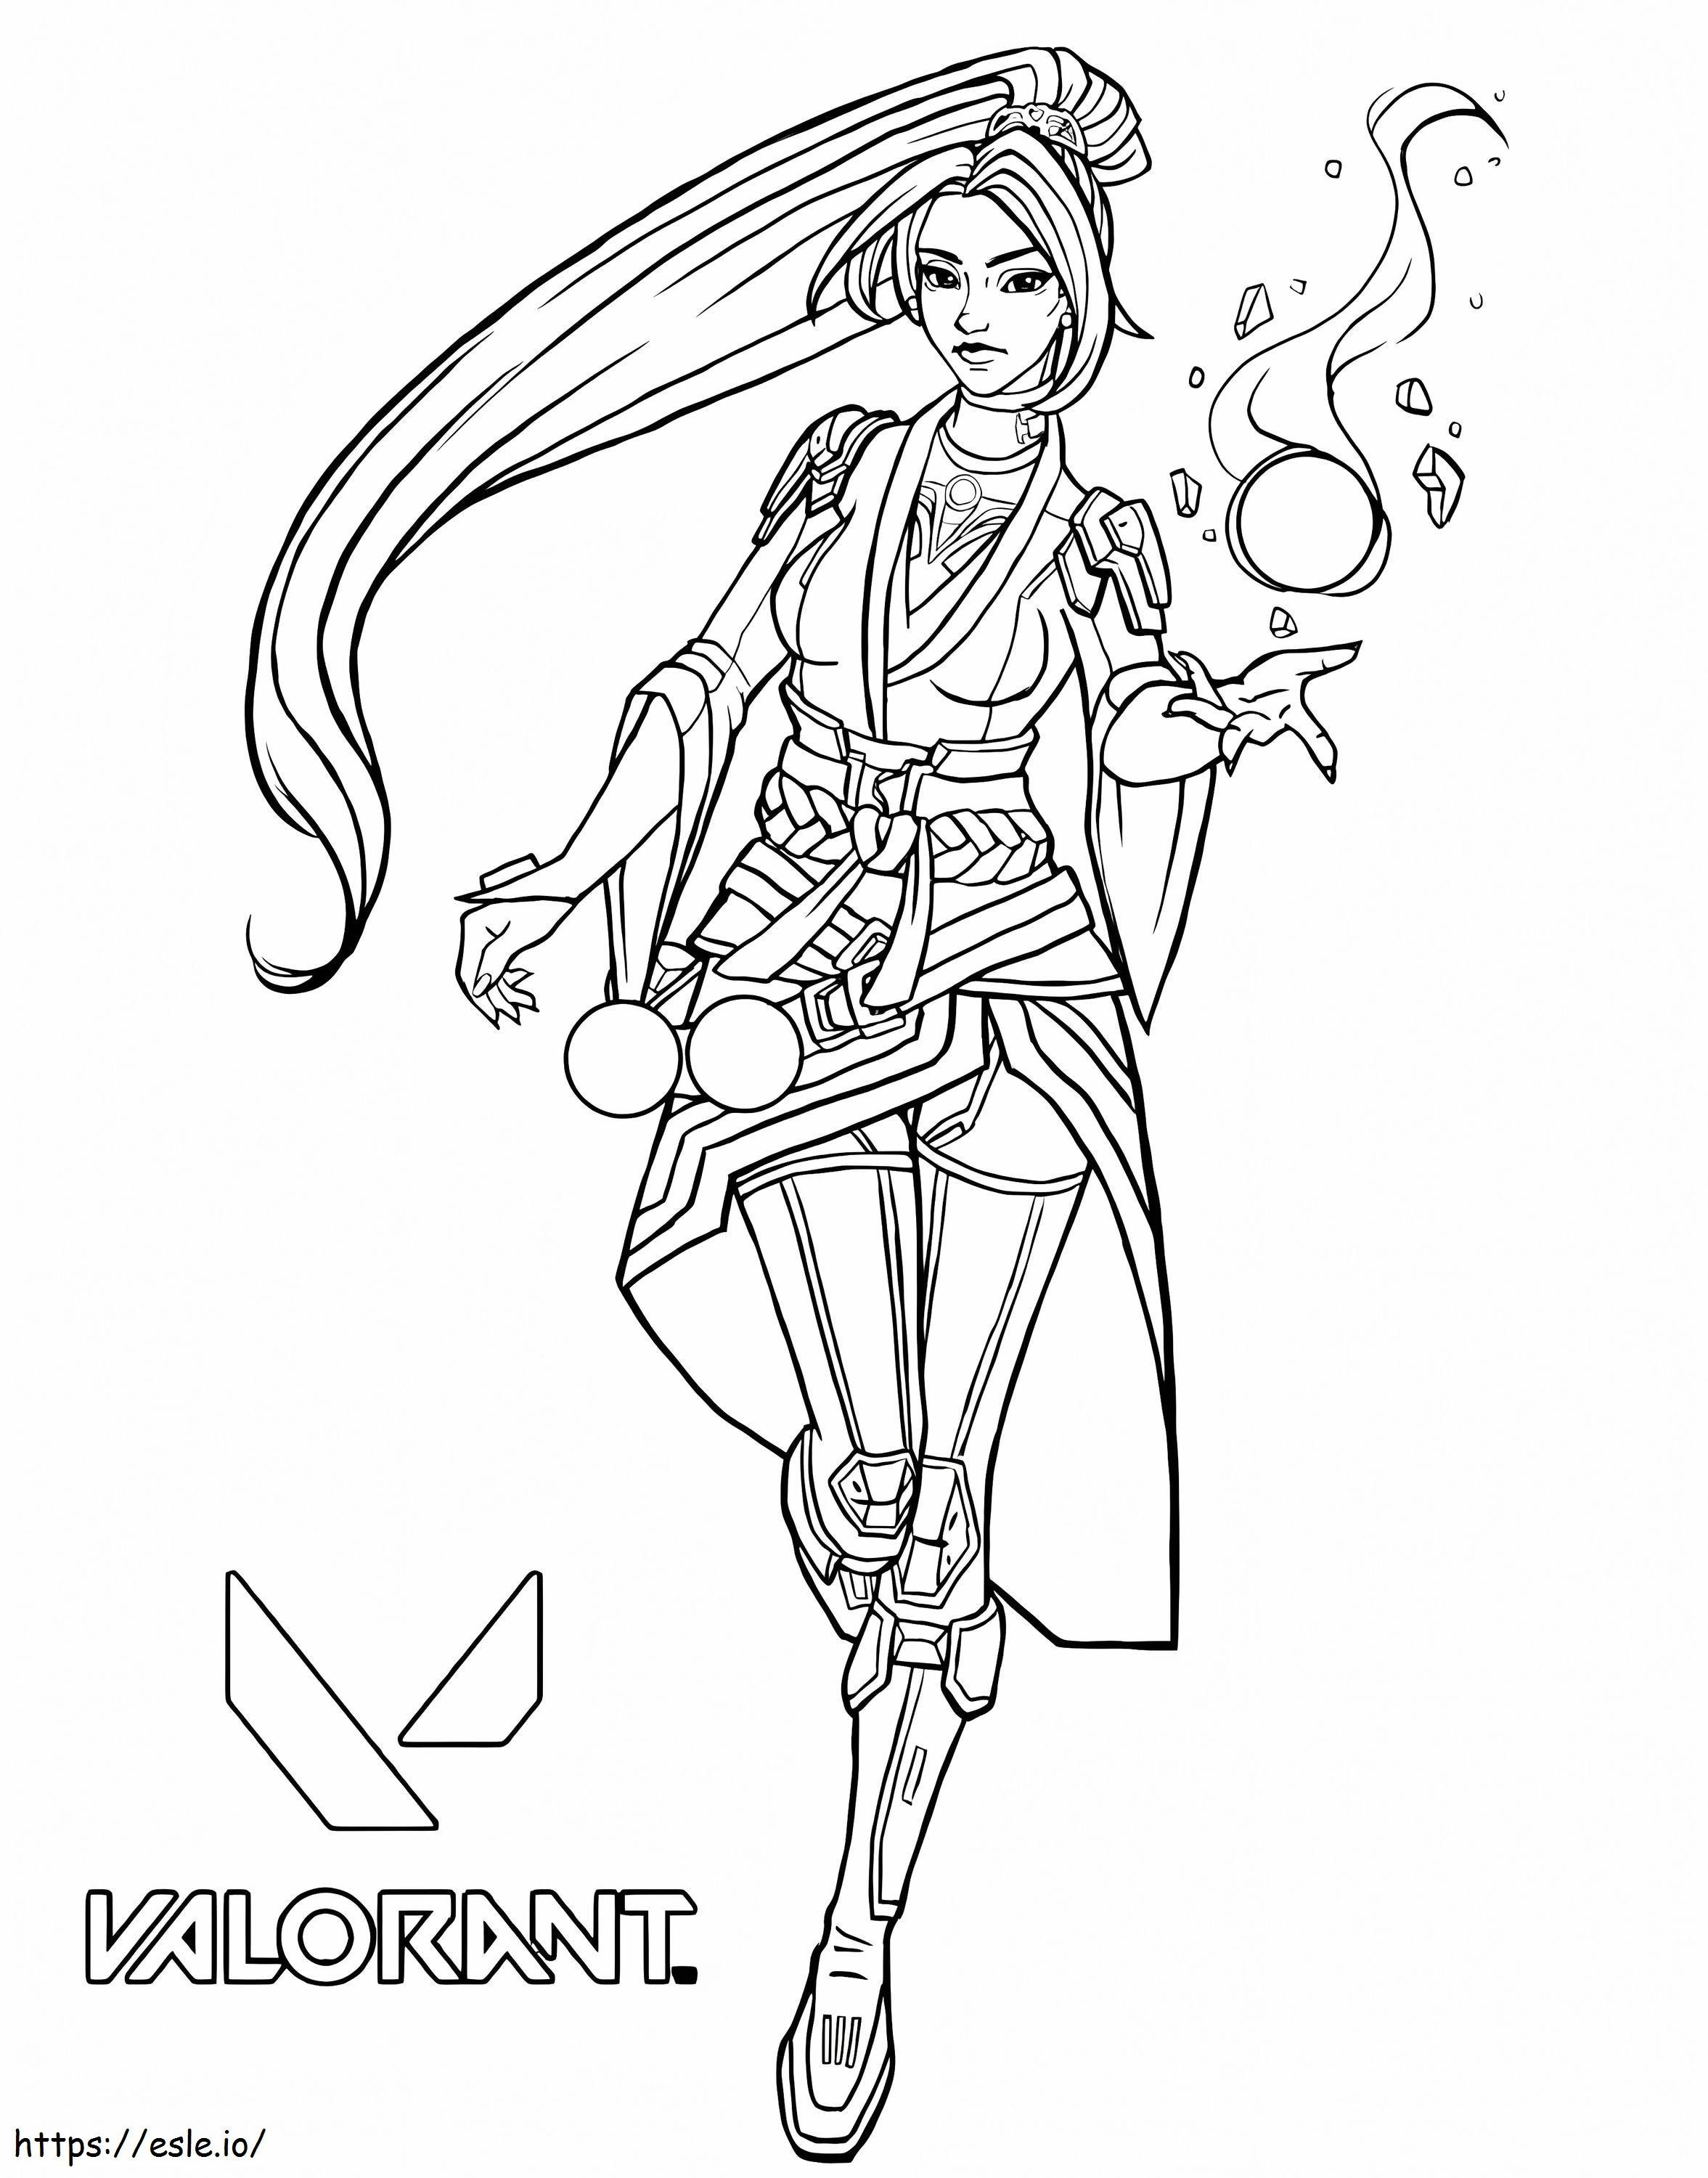 Sage Valorant coloring page